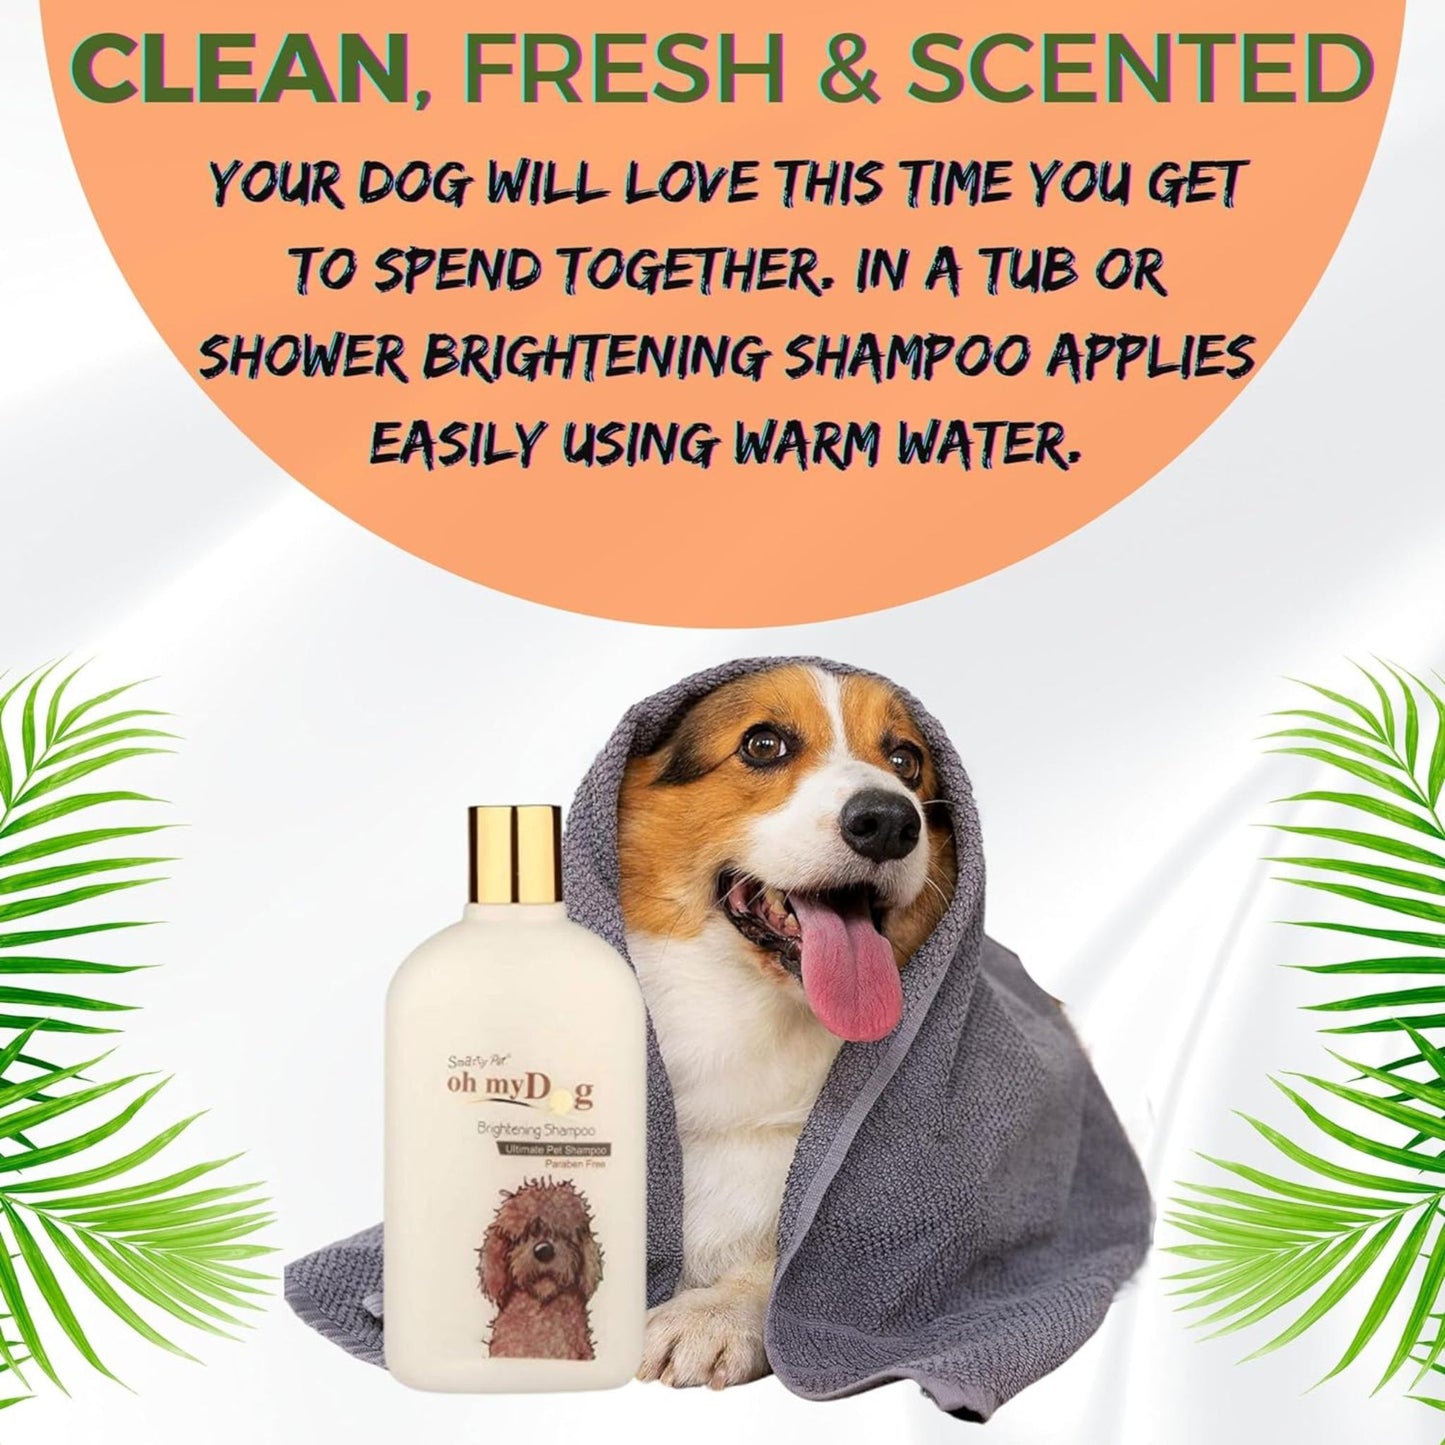 Oh My Dog Pet Shampoo for Puppies & Dogs (Brightening, 1000ml)